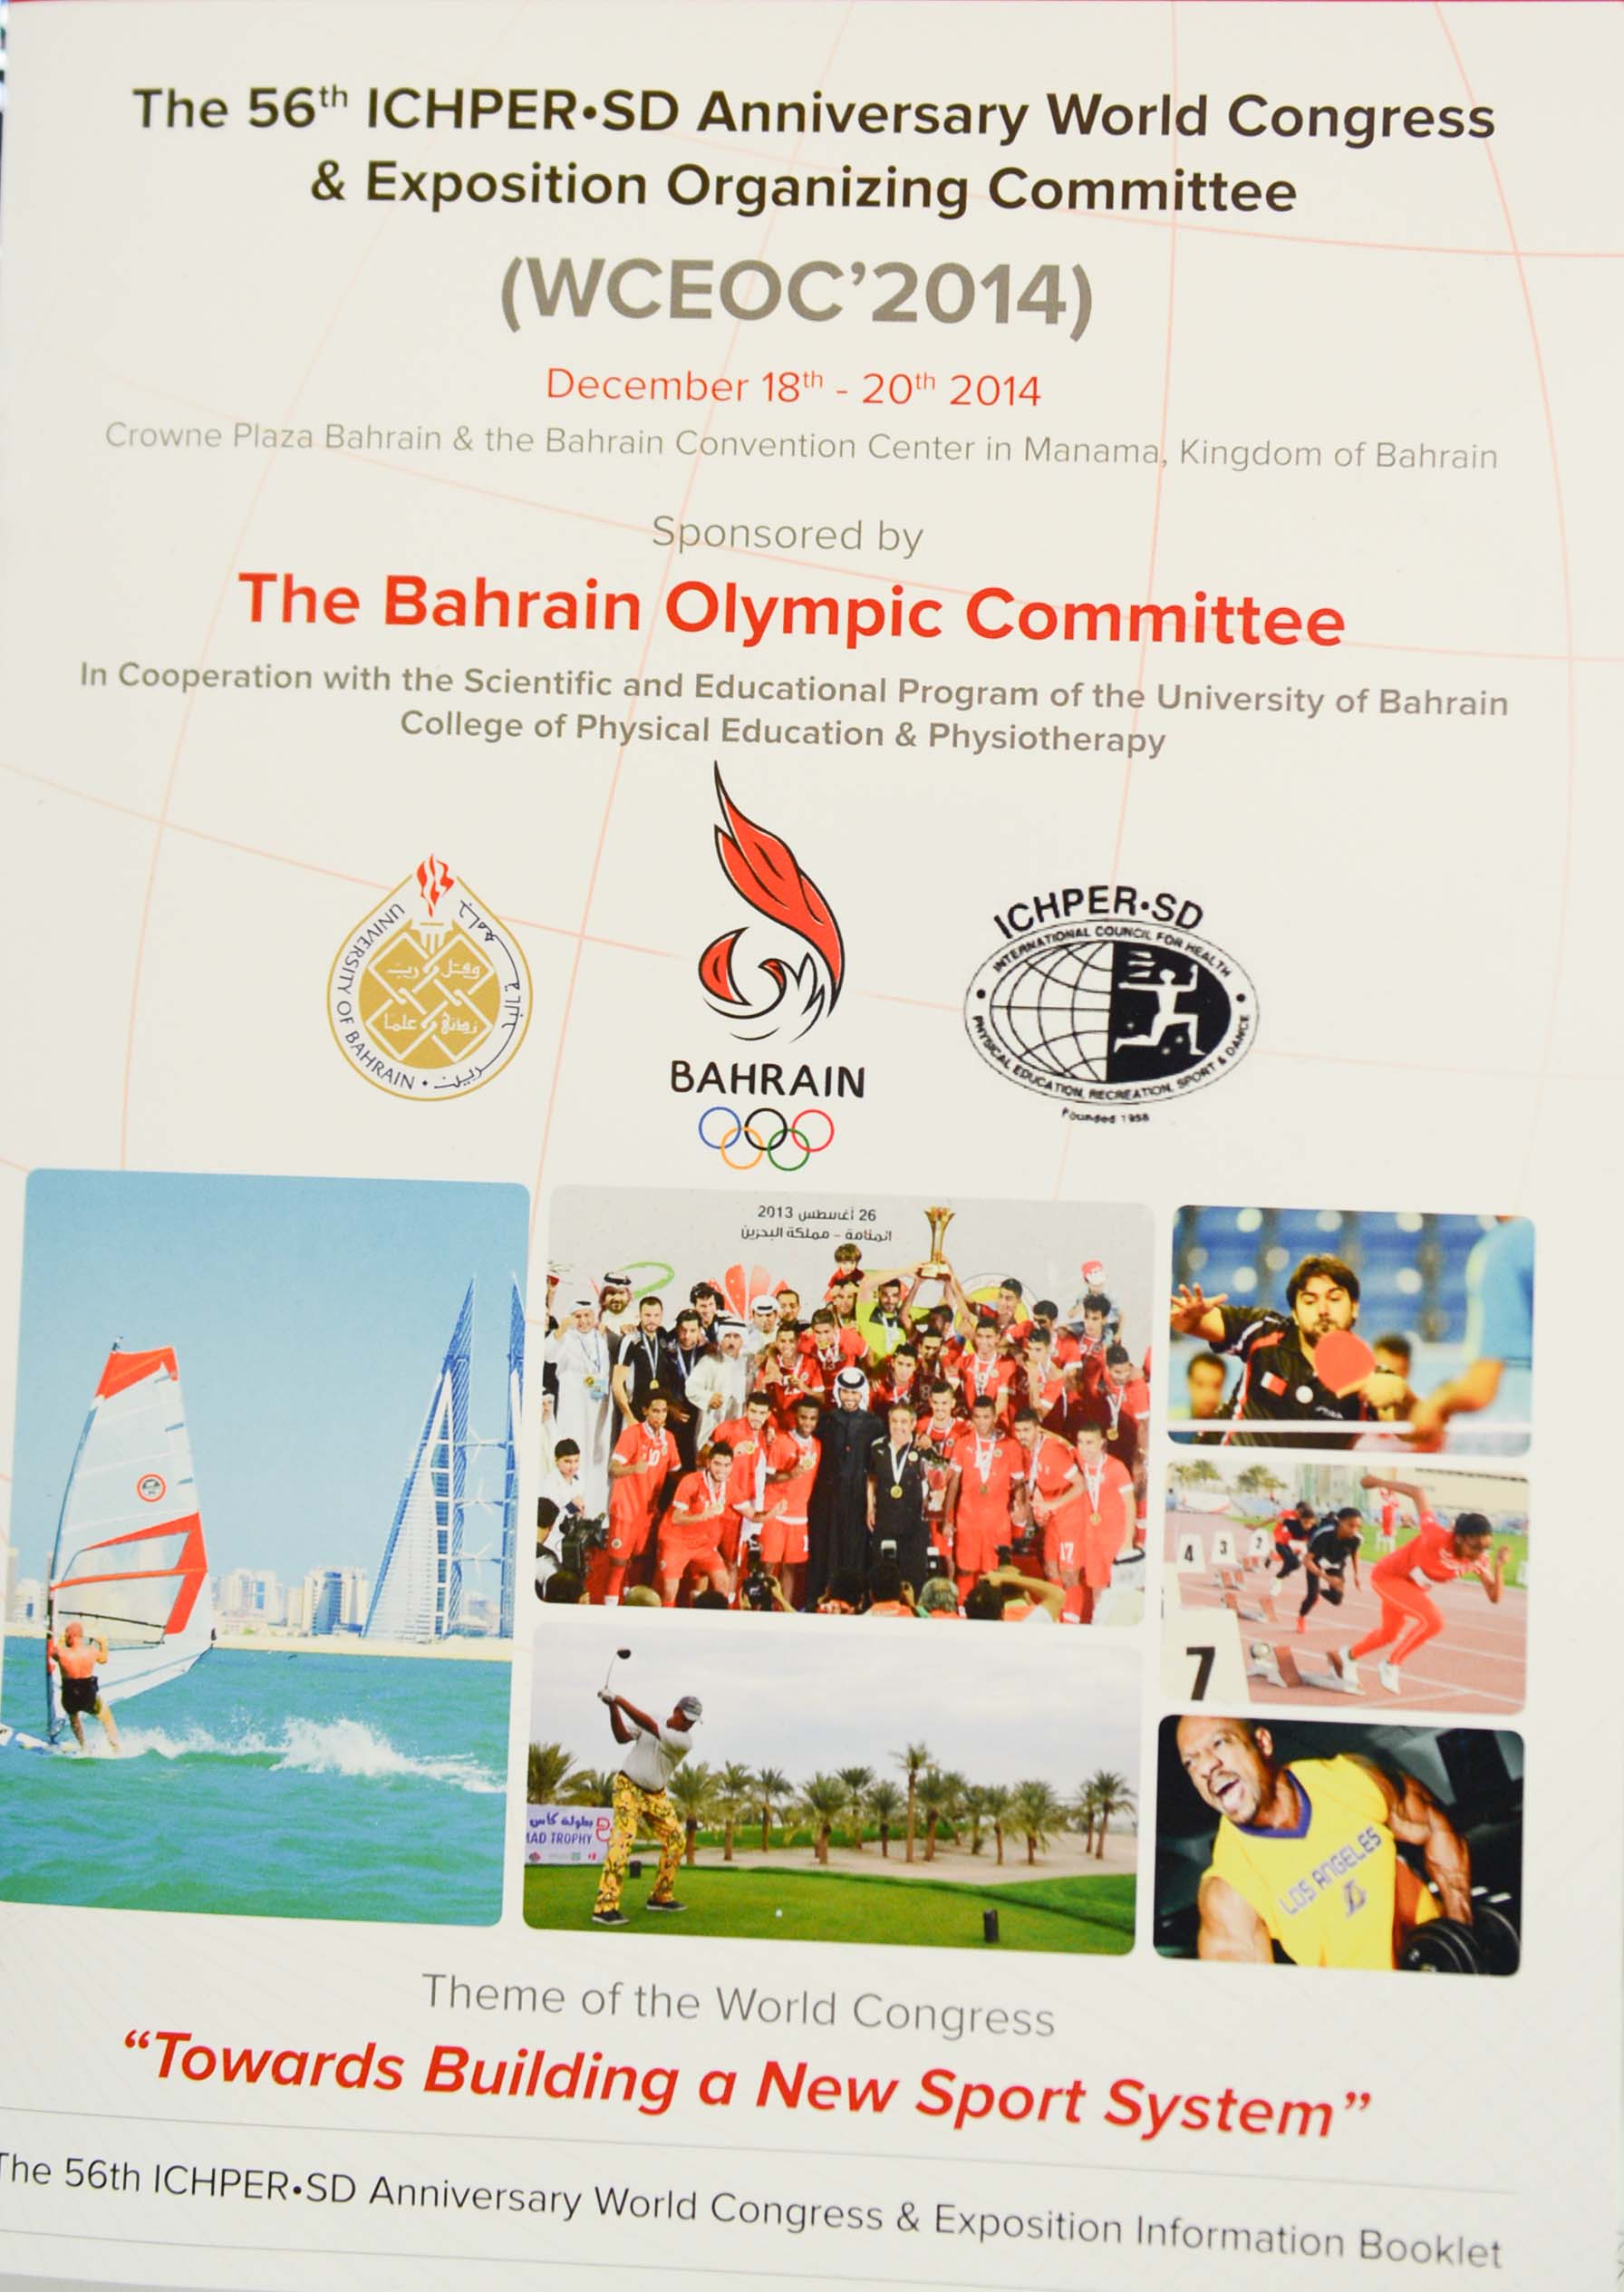 The Anniversary World Congress and Exposition will be held in Bahrain's capital Manama from December 18 to 20 ©Bahrain Olympic Committee